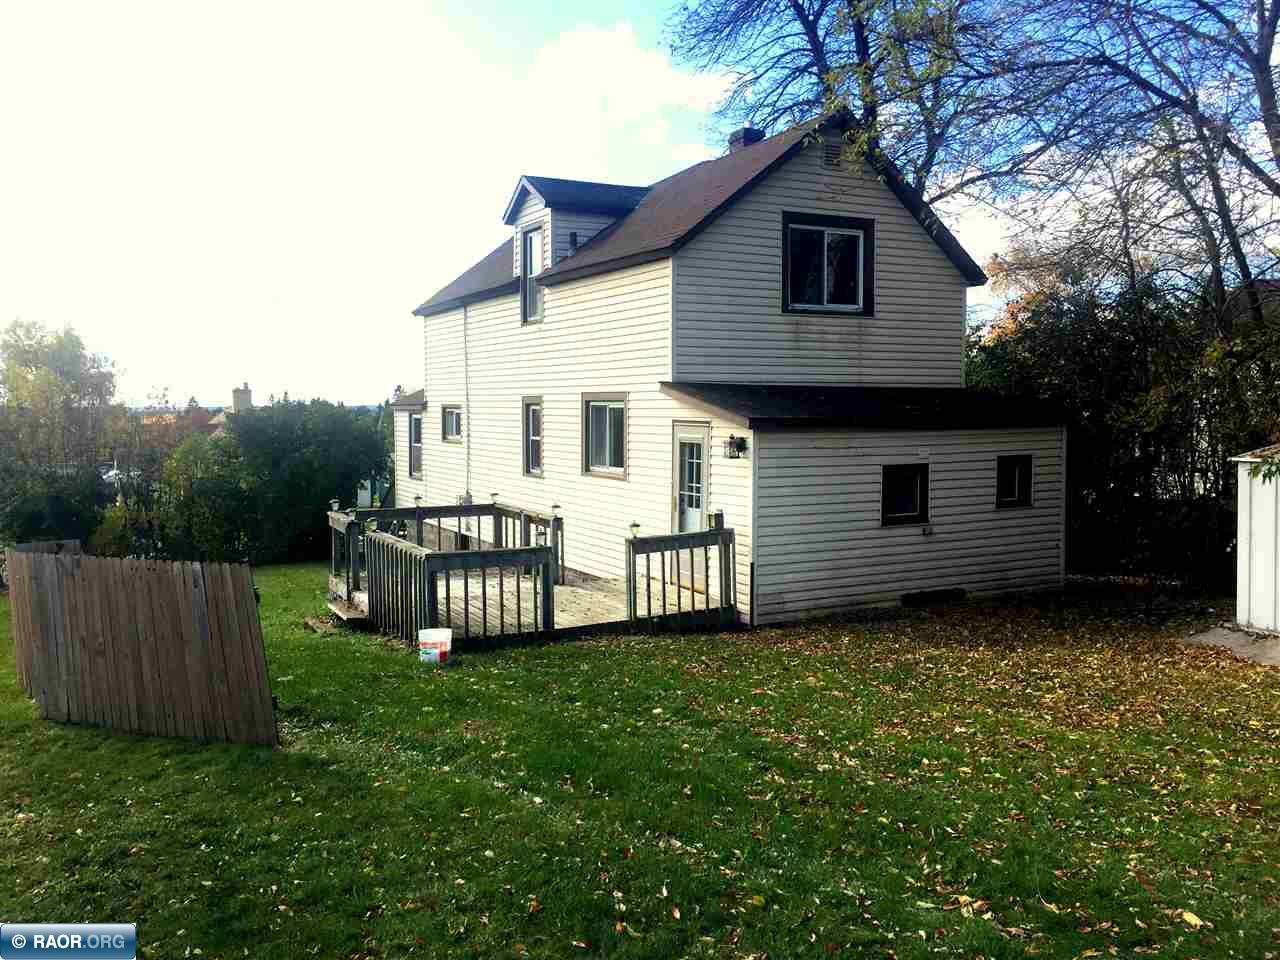 Eveleth Real Estate - Listing ID 140386 - (Residential)